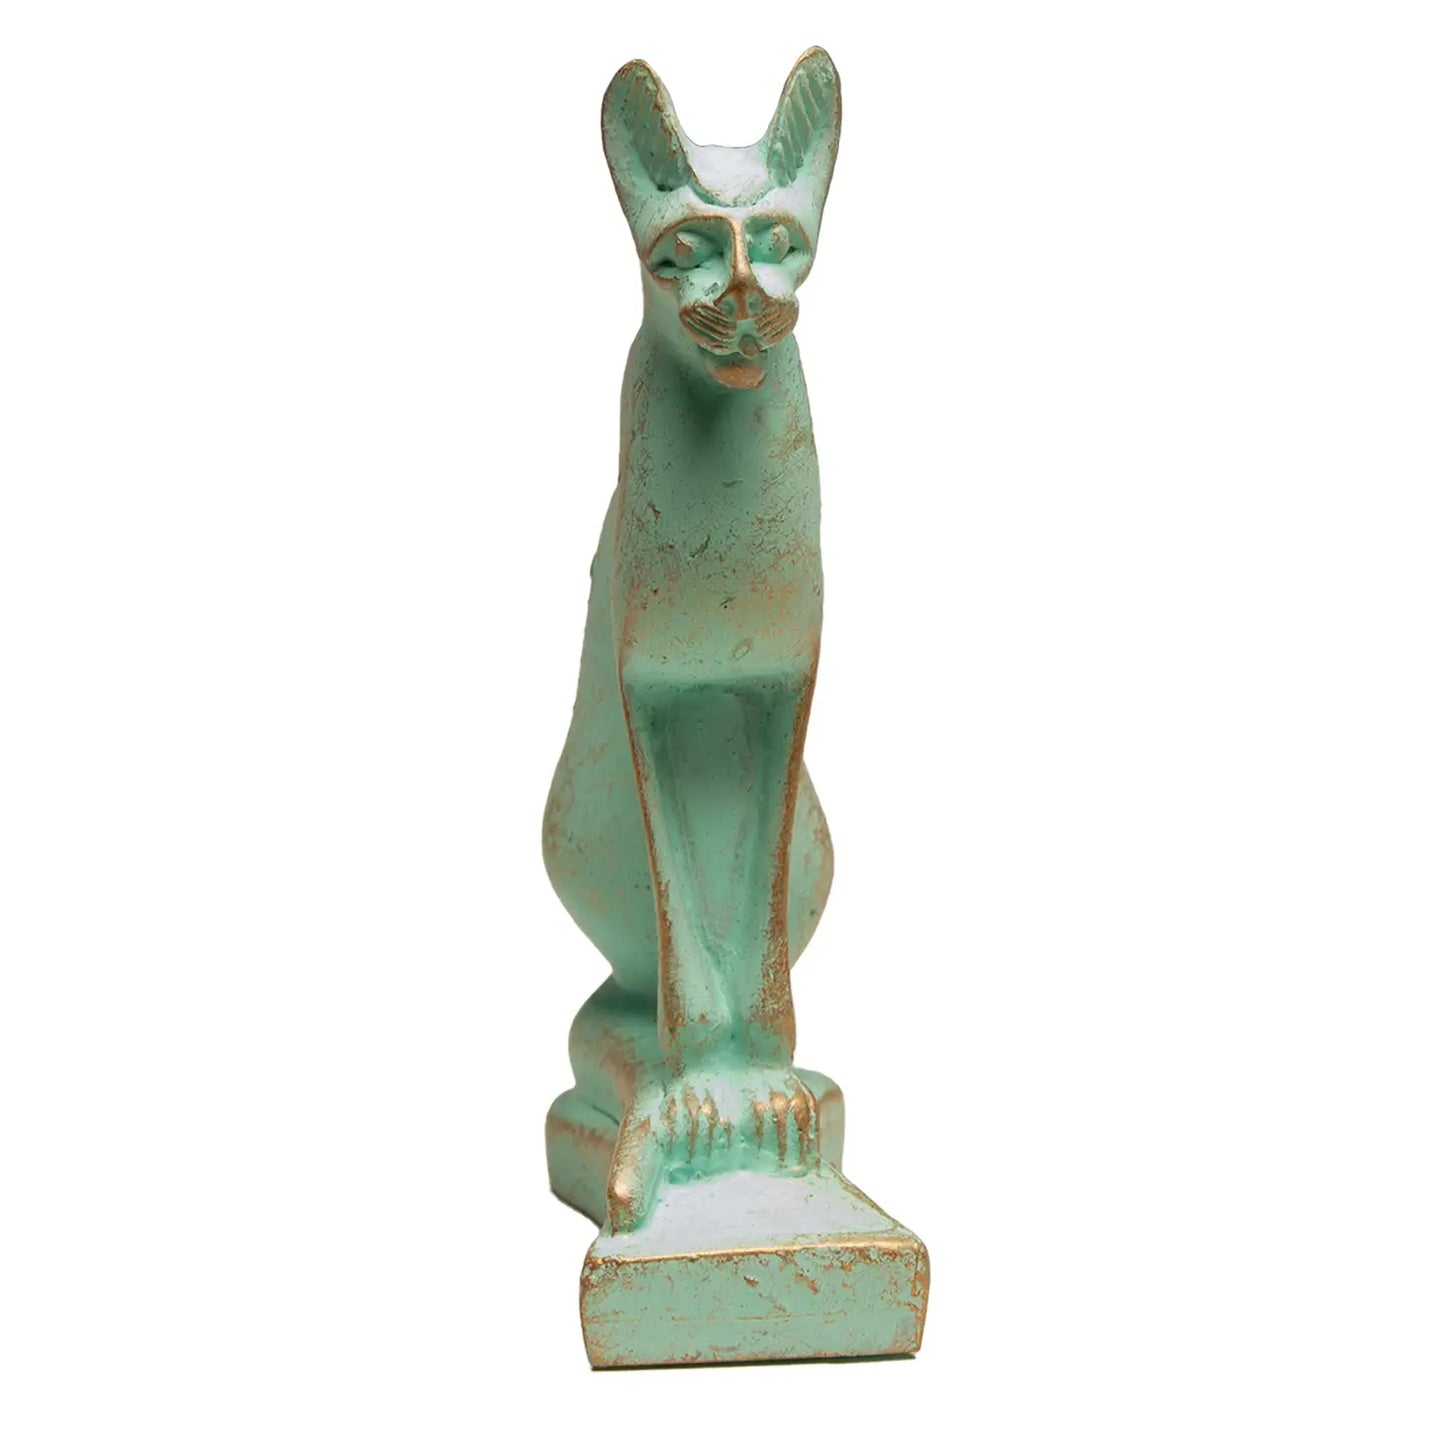 Bastet Cat with Green and Gold  Patina - 3"